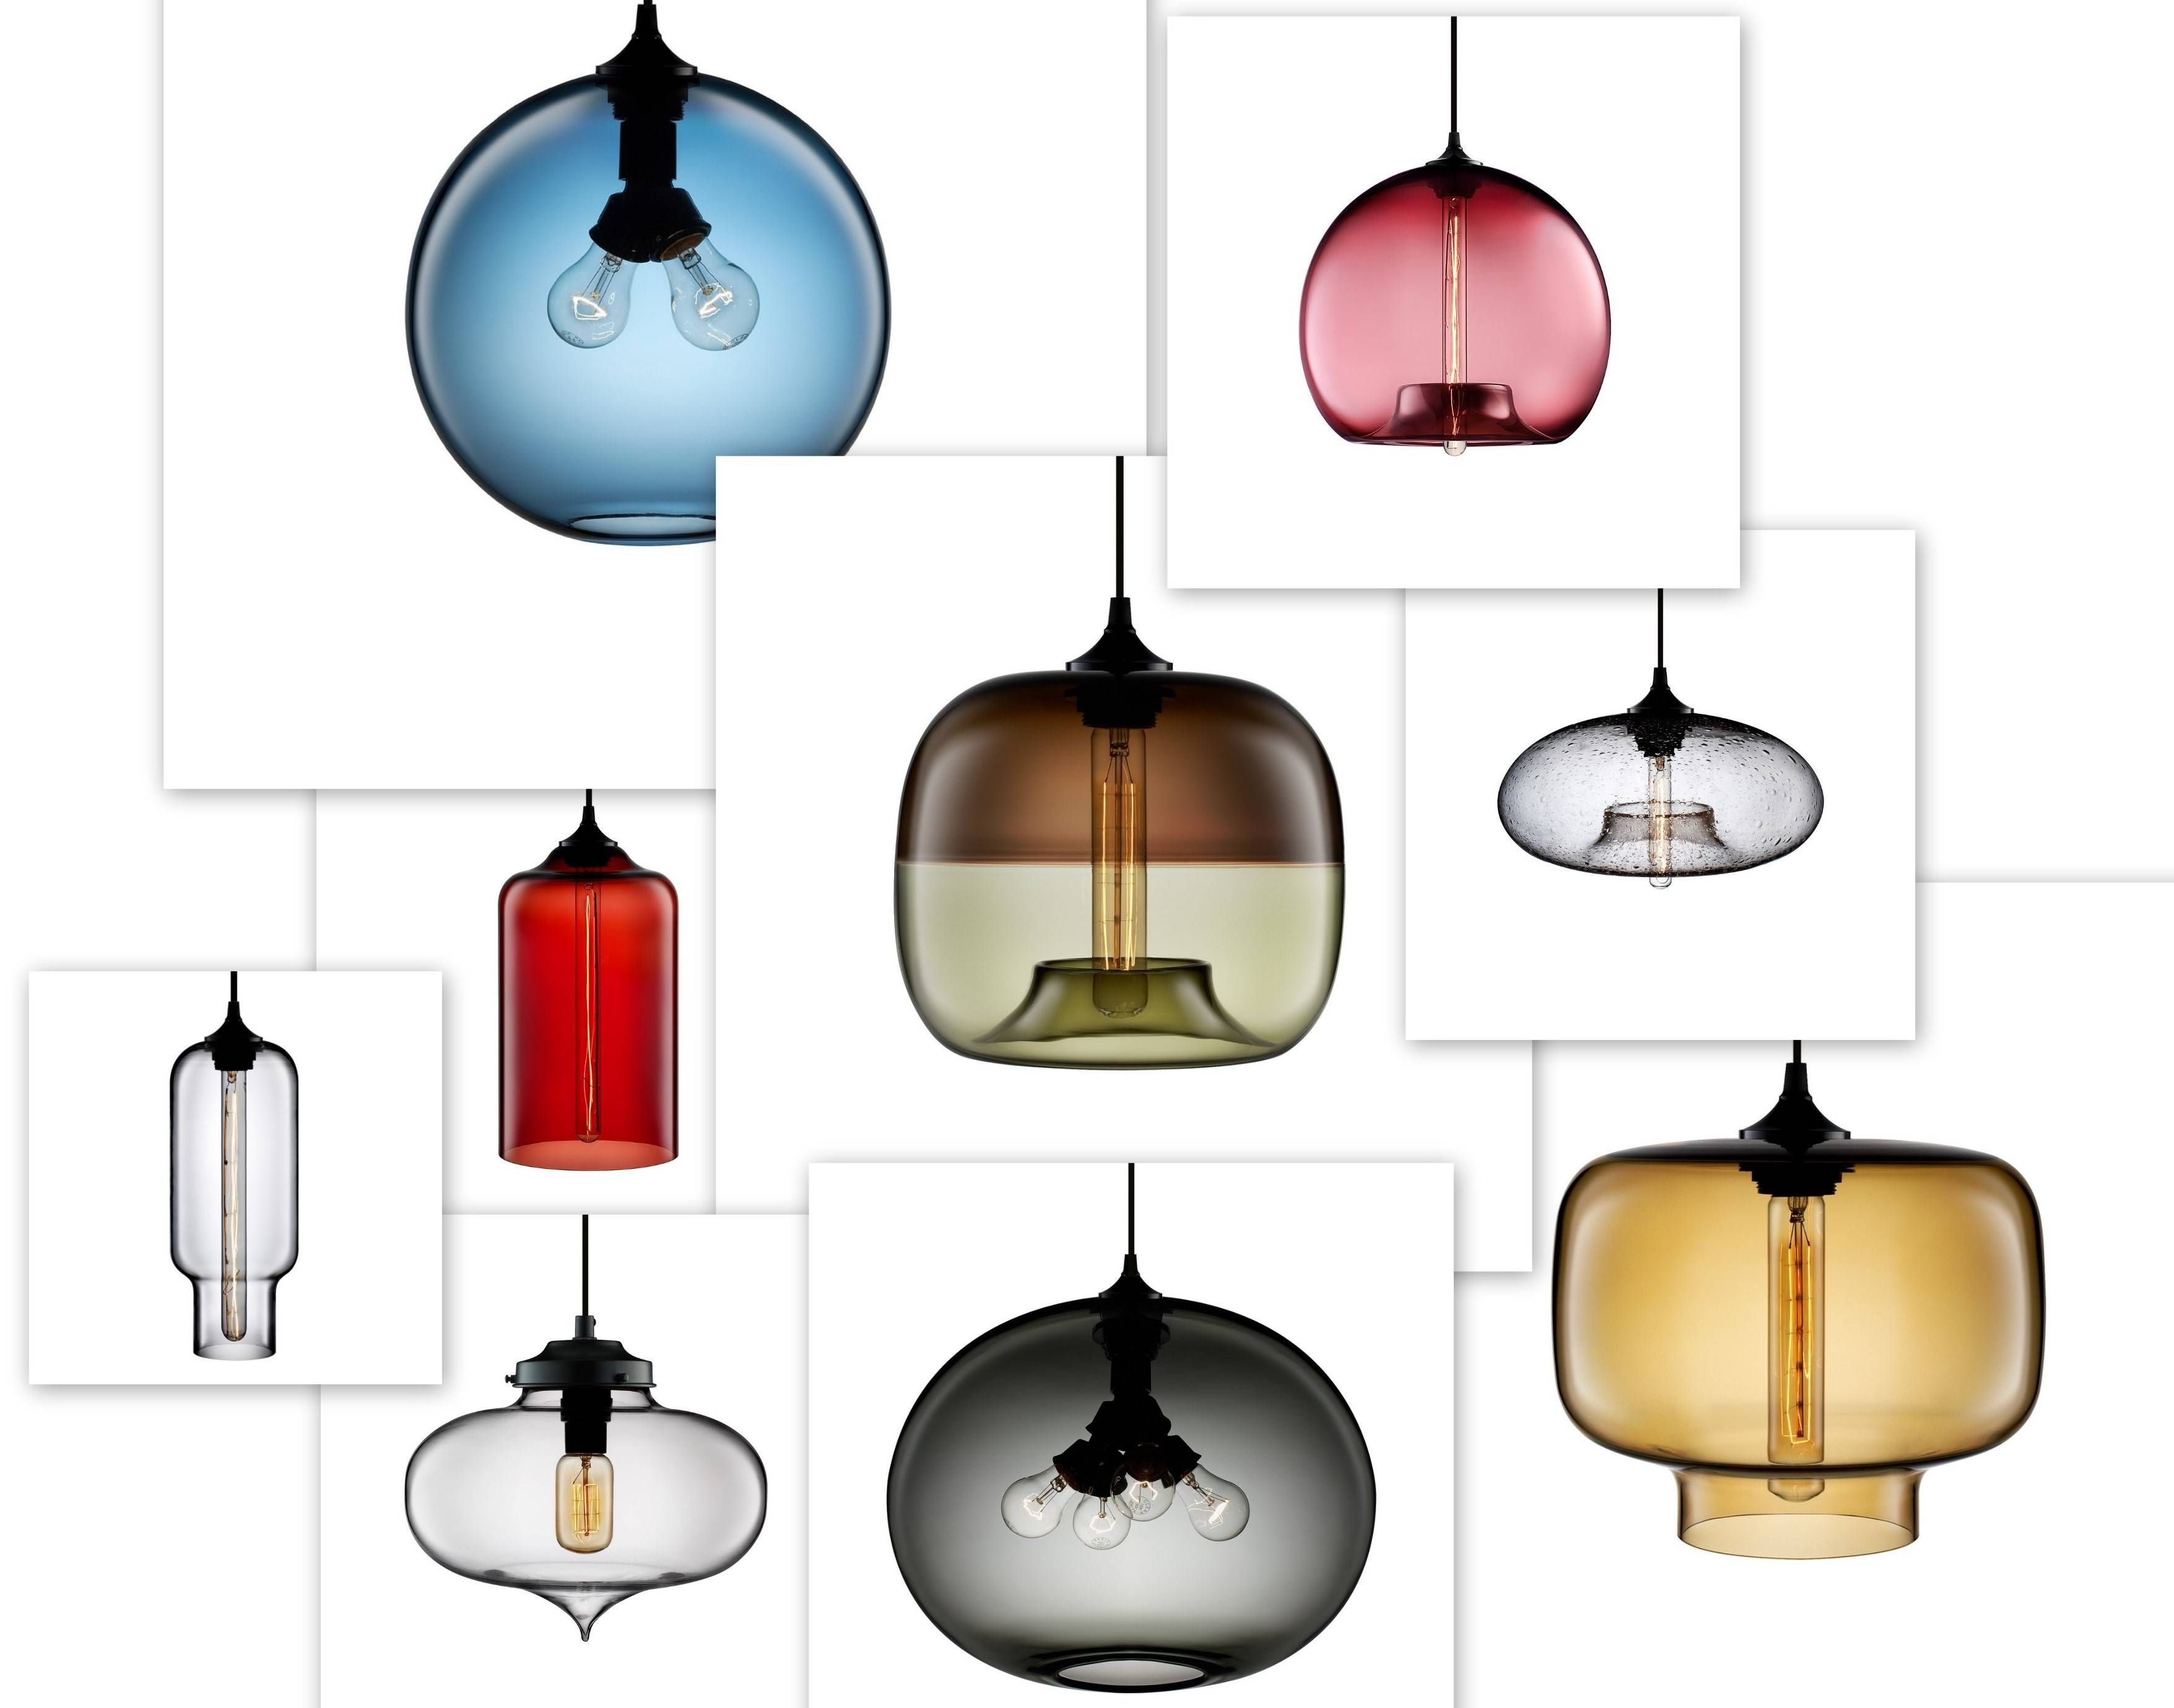 Amazing Colored Glass Pendant Lights With Home Design Plan Pendant Regarding Blown Glass Ceiling Lights (View 11 of 15)